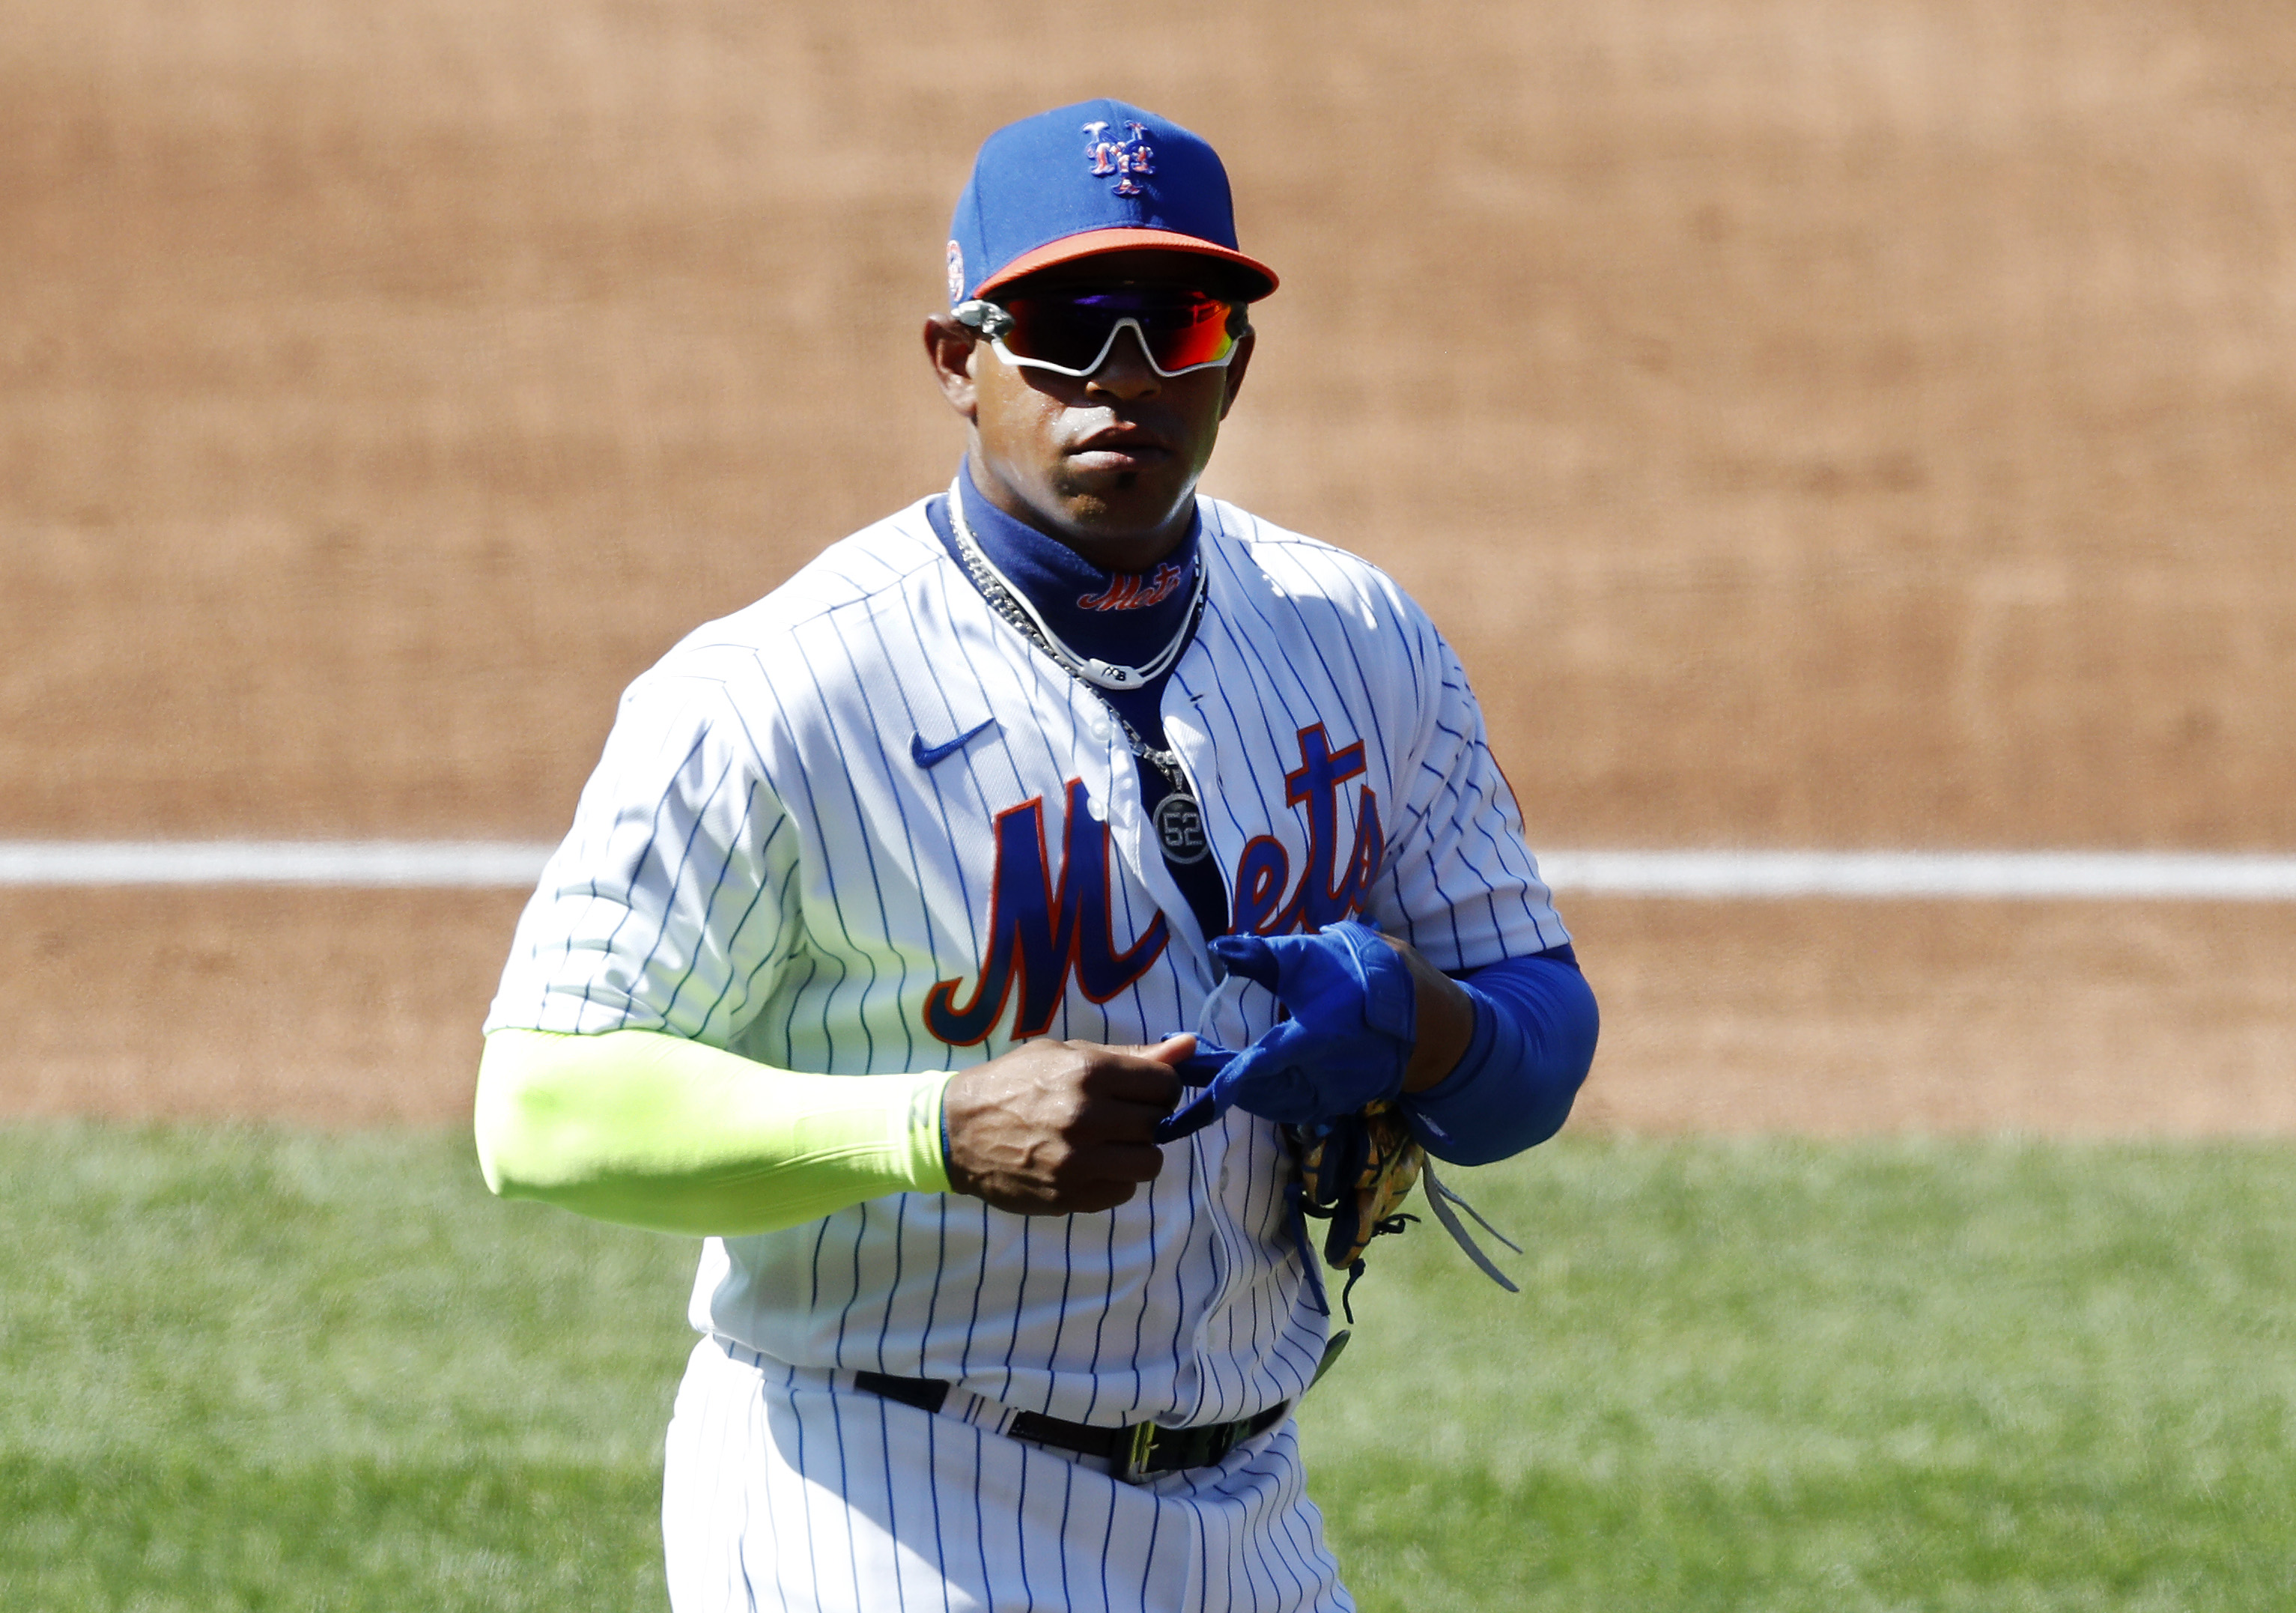 Mets Yoenis Céspedes Opts Out of Season Due to Virus Concerns, GM Says –  NBC New York